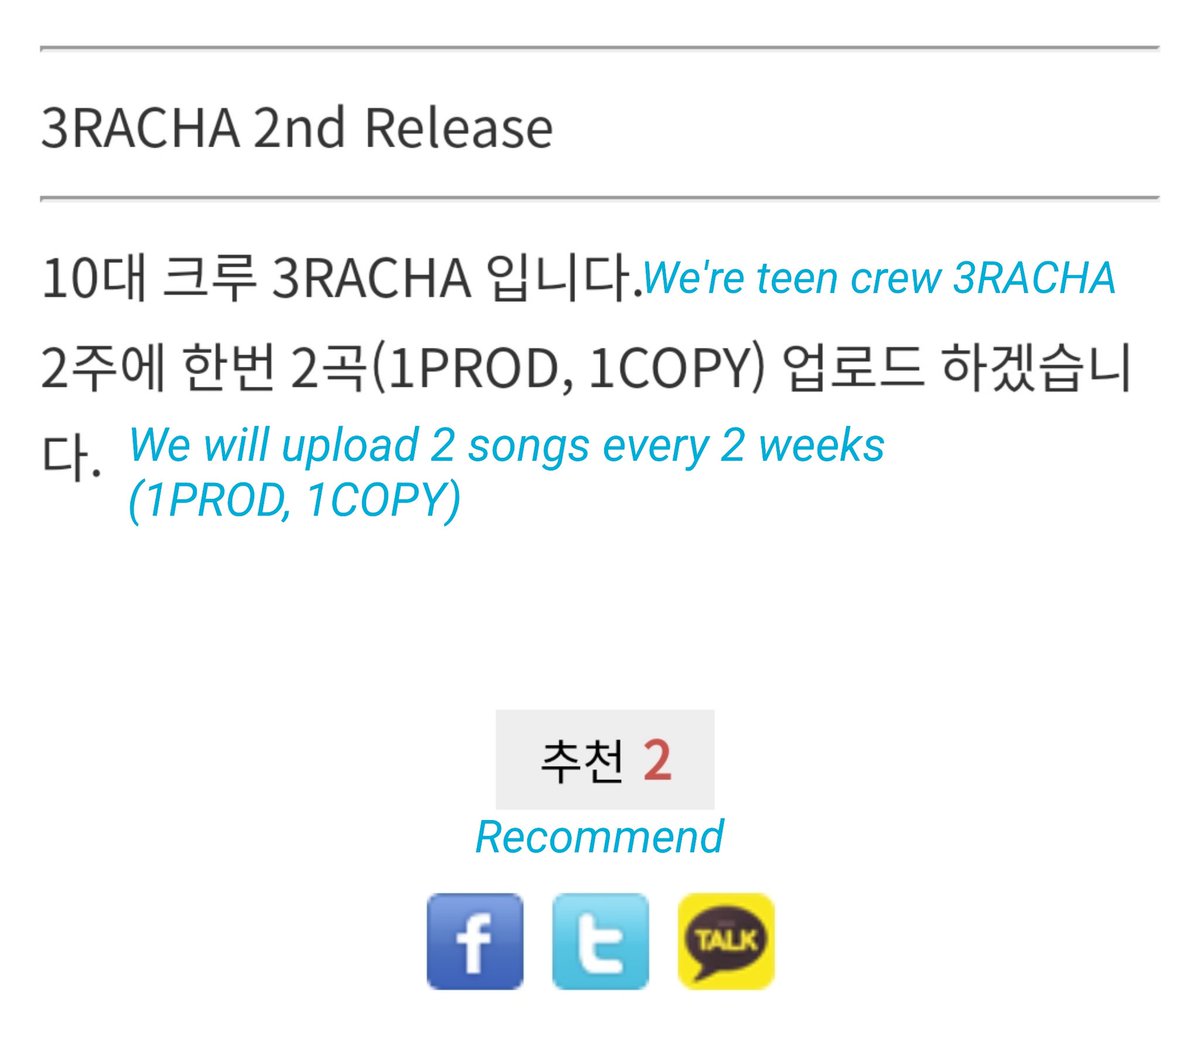 On 1st Feb 2017 at 10:02PM KST,  #3RACHA uploaded their 2nd release:  http://hiphople.com/9172665 Title: 3RACHA 2nd Release  Tik Tok (Prod.CB97) <deleted track=Complain>Still same. 2 users recommend but there's still no comment.No comments = No feedback